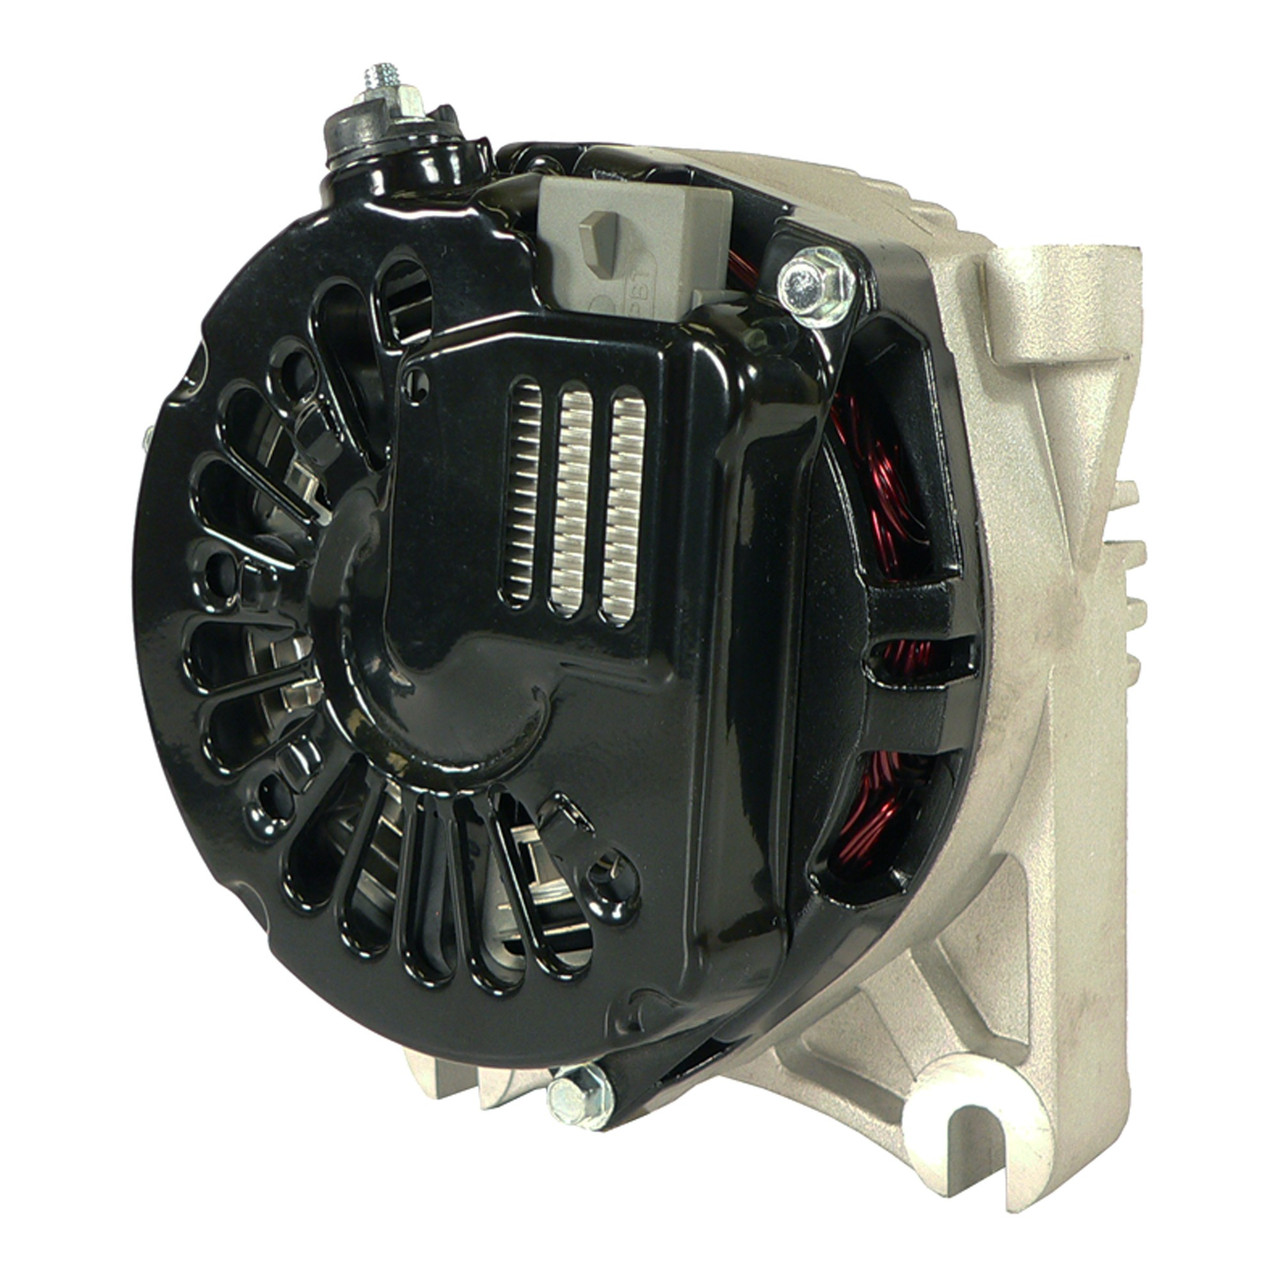 Alternator For 4.6L Ford Mustang 1996-2002 Crown Victoria 1995-2000; 400-14029 